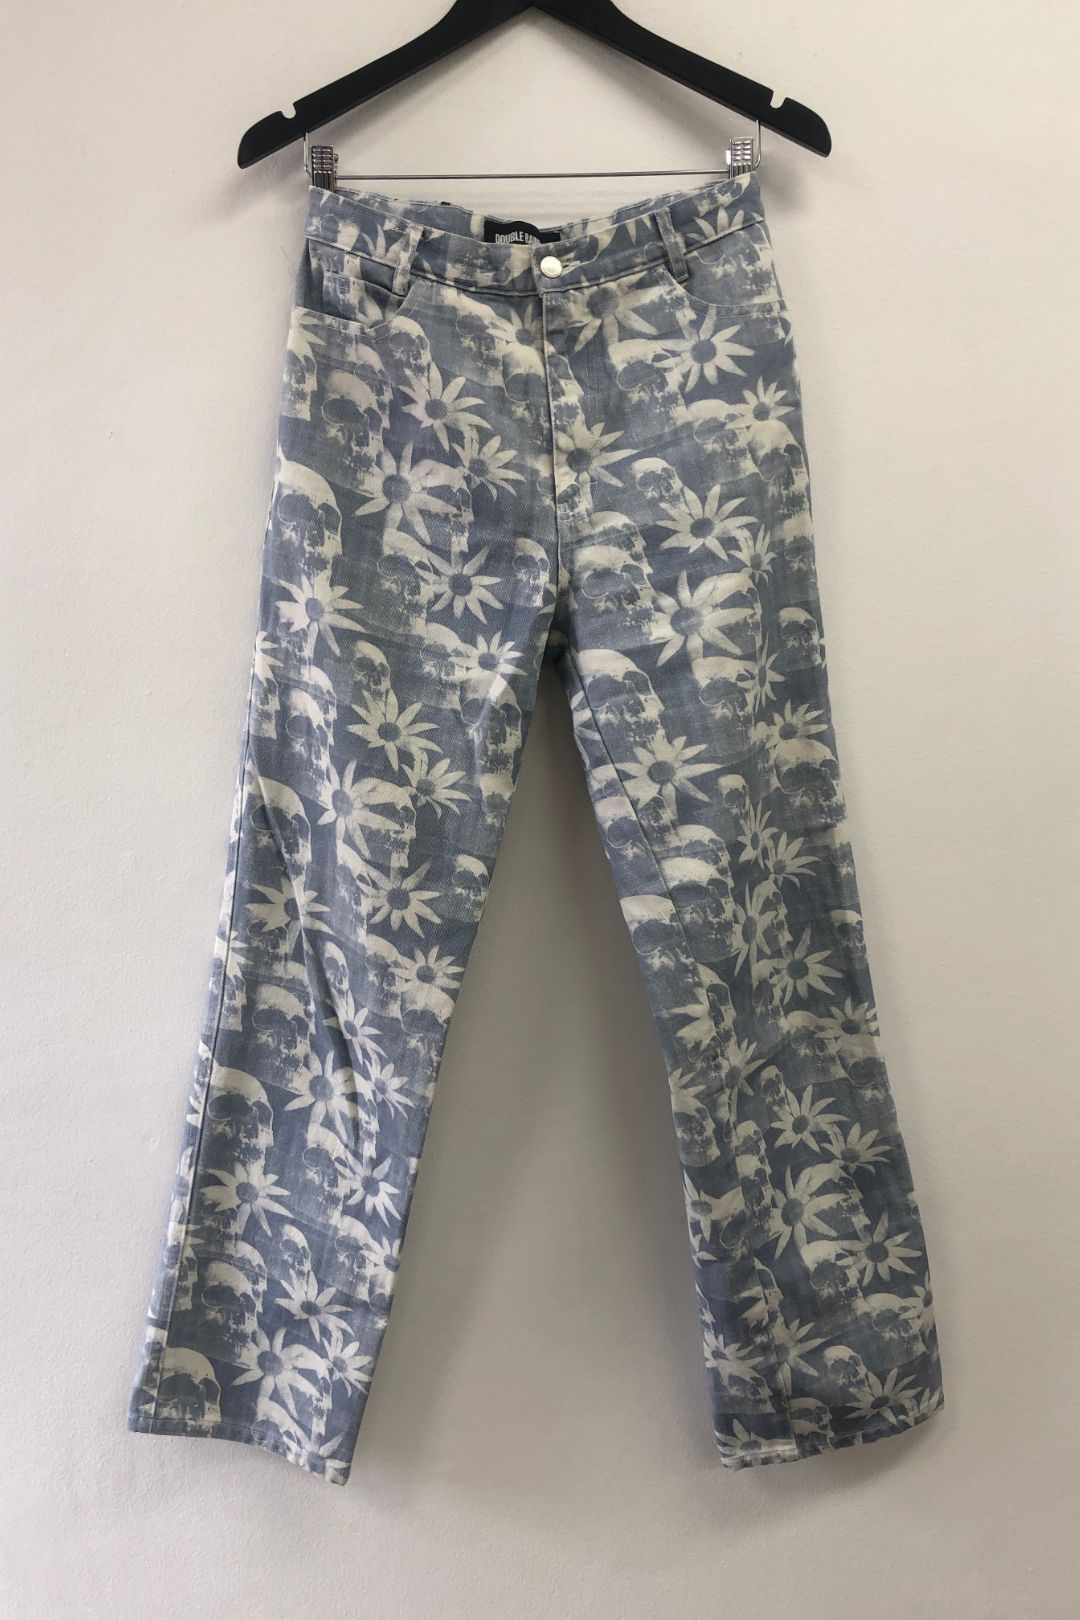 Double Rainbouu - Skull and Floral Print Jeans